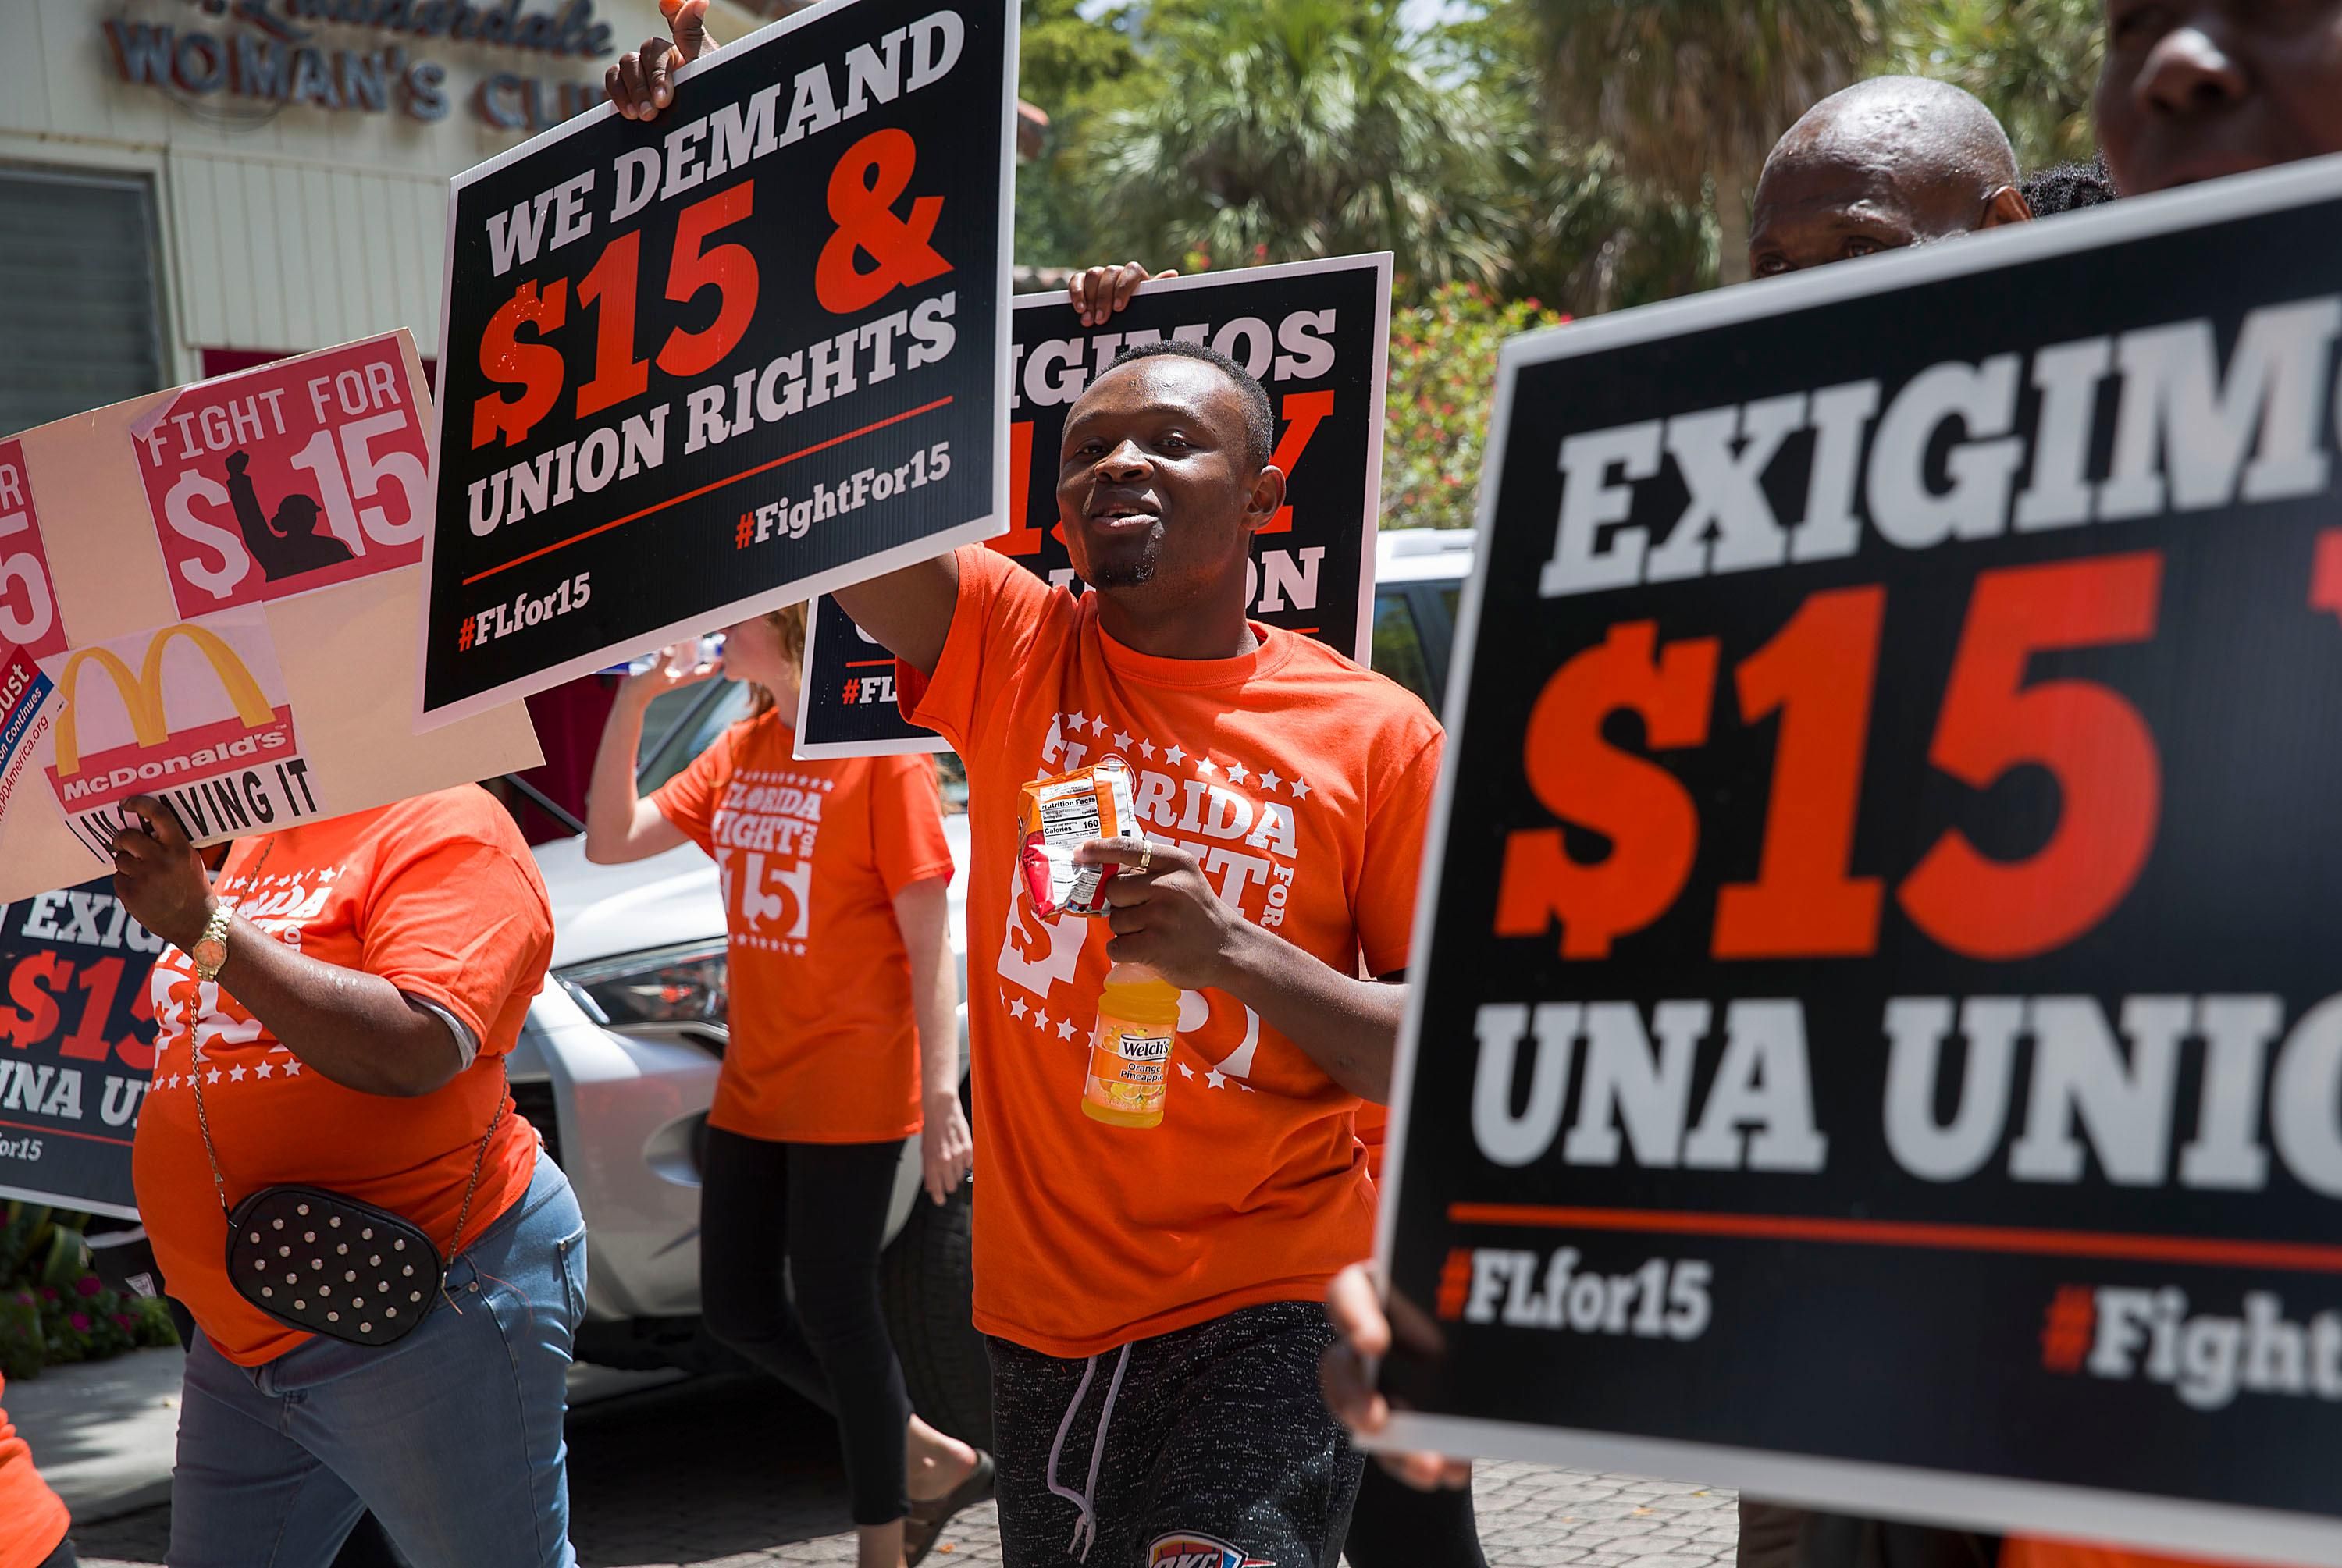 Floridians rally in support of a $15 minimum wage